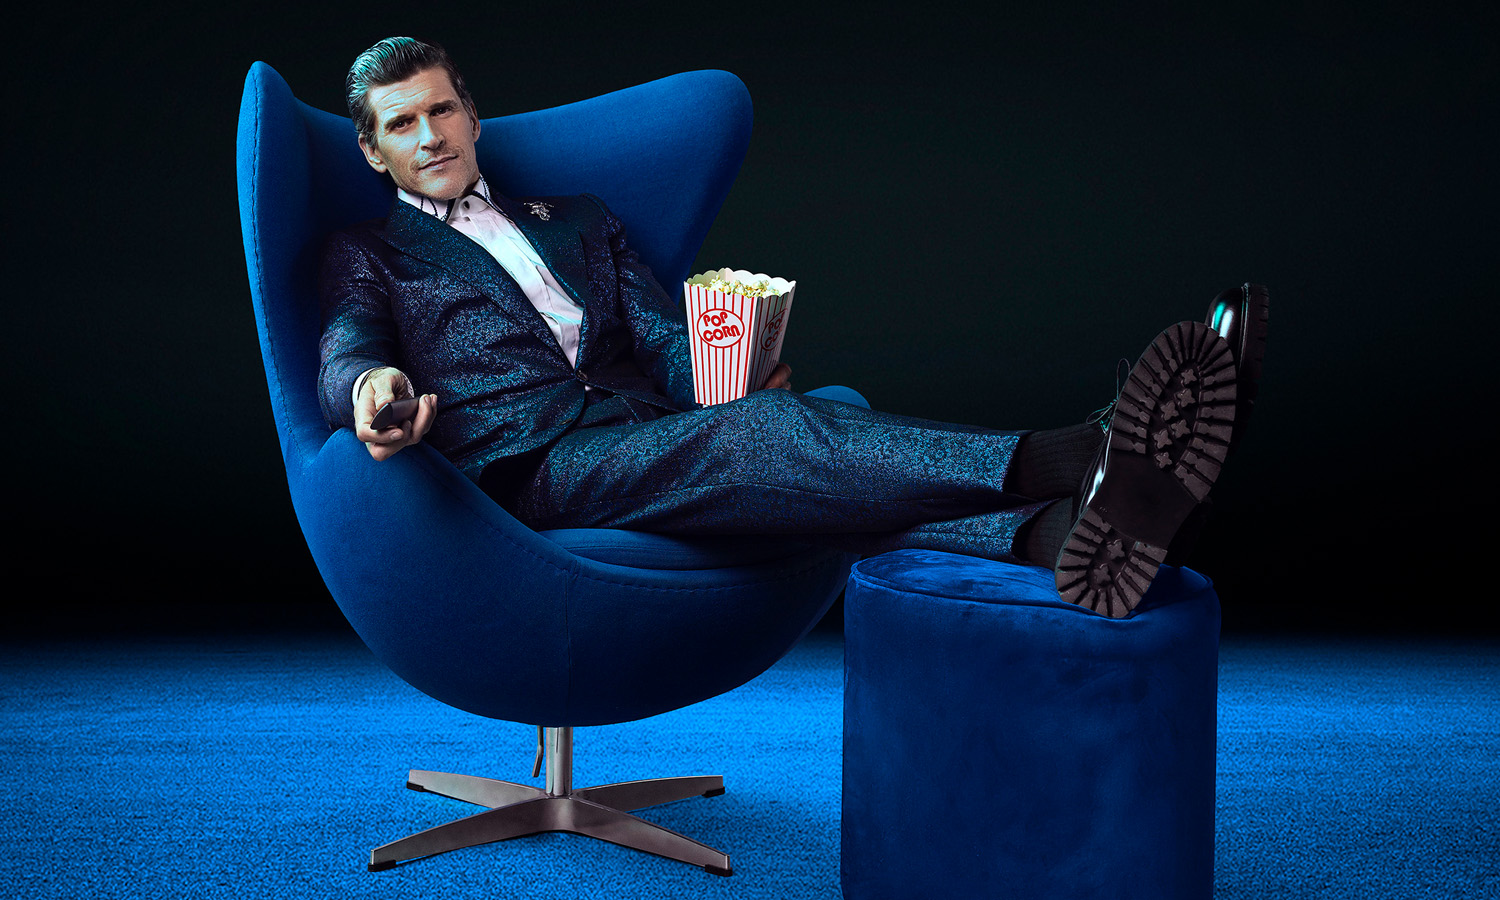 Osher Günsberg in an armchair holding popcorn and a TV remote.